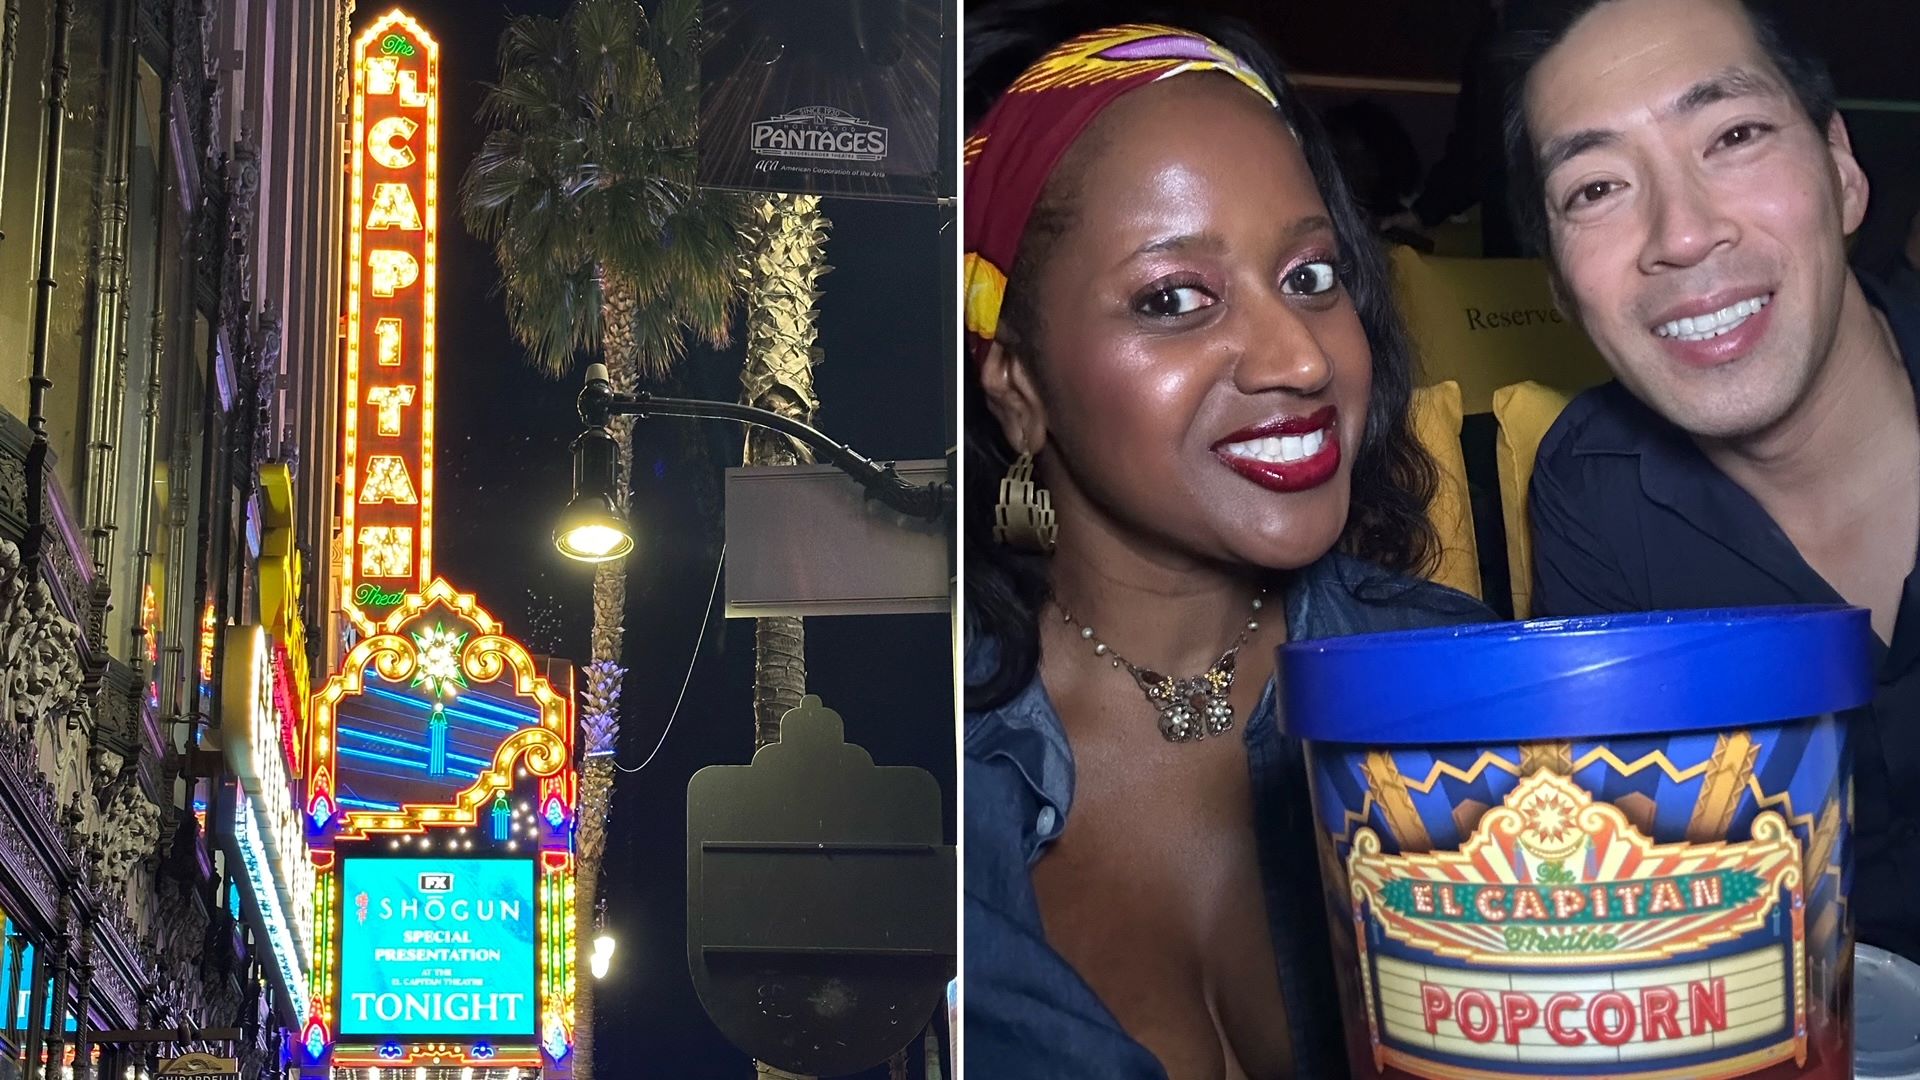 An image with two pictures, one is the Hollywood El Capitan Theatre and one is lifestyle blogger Ariel Johns posing in the theatre with a tub of popcorn.